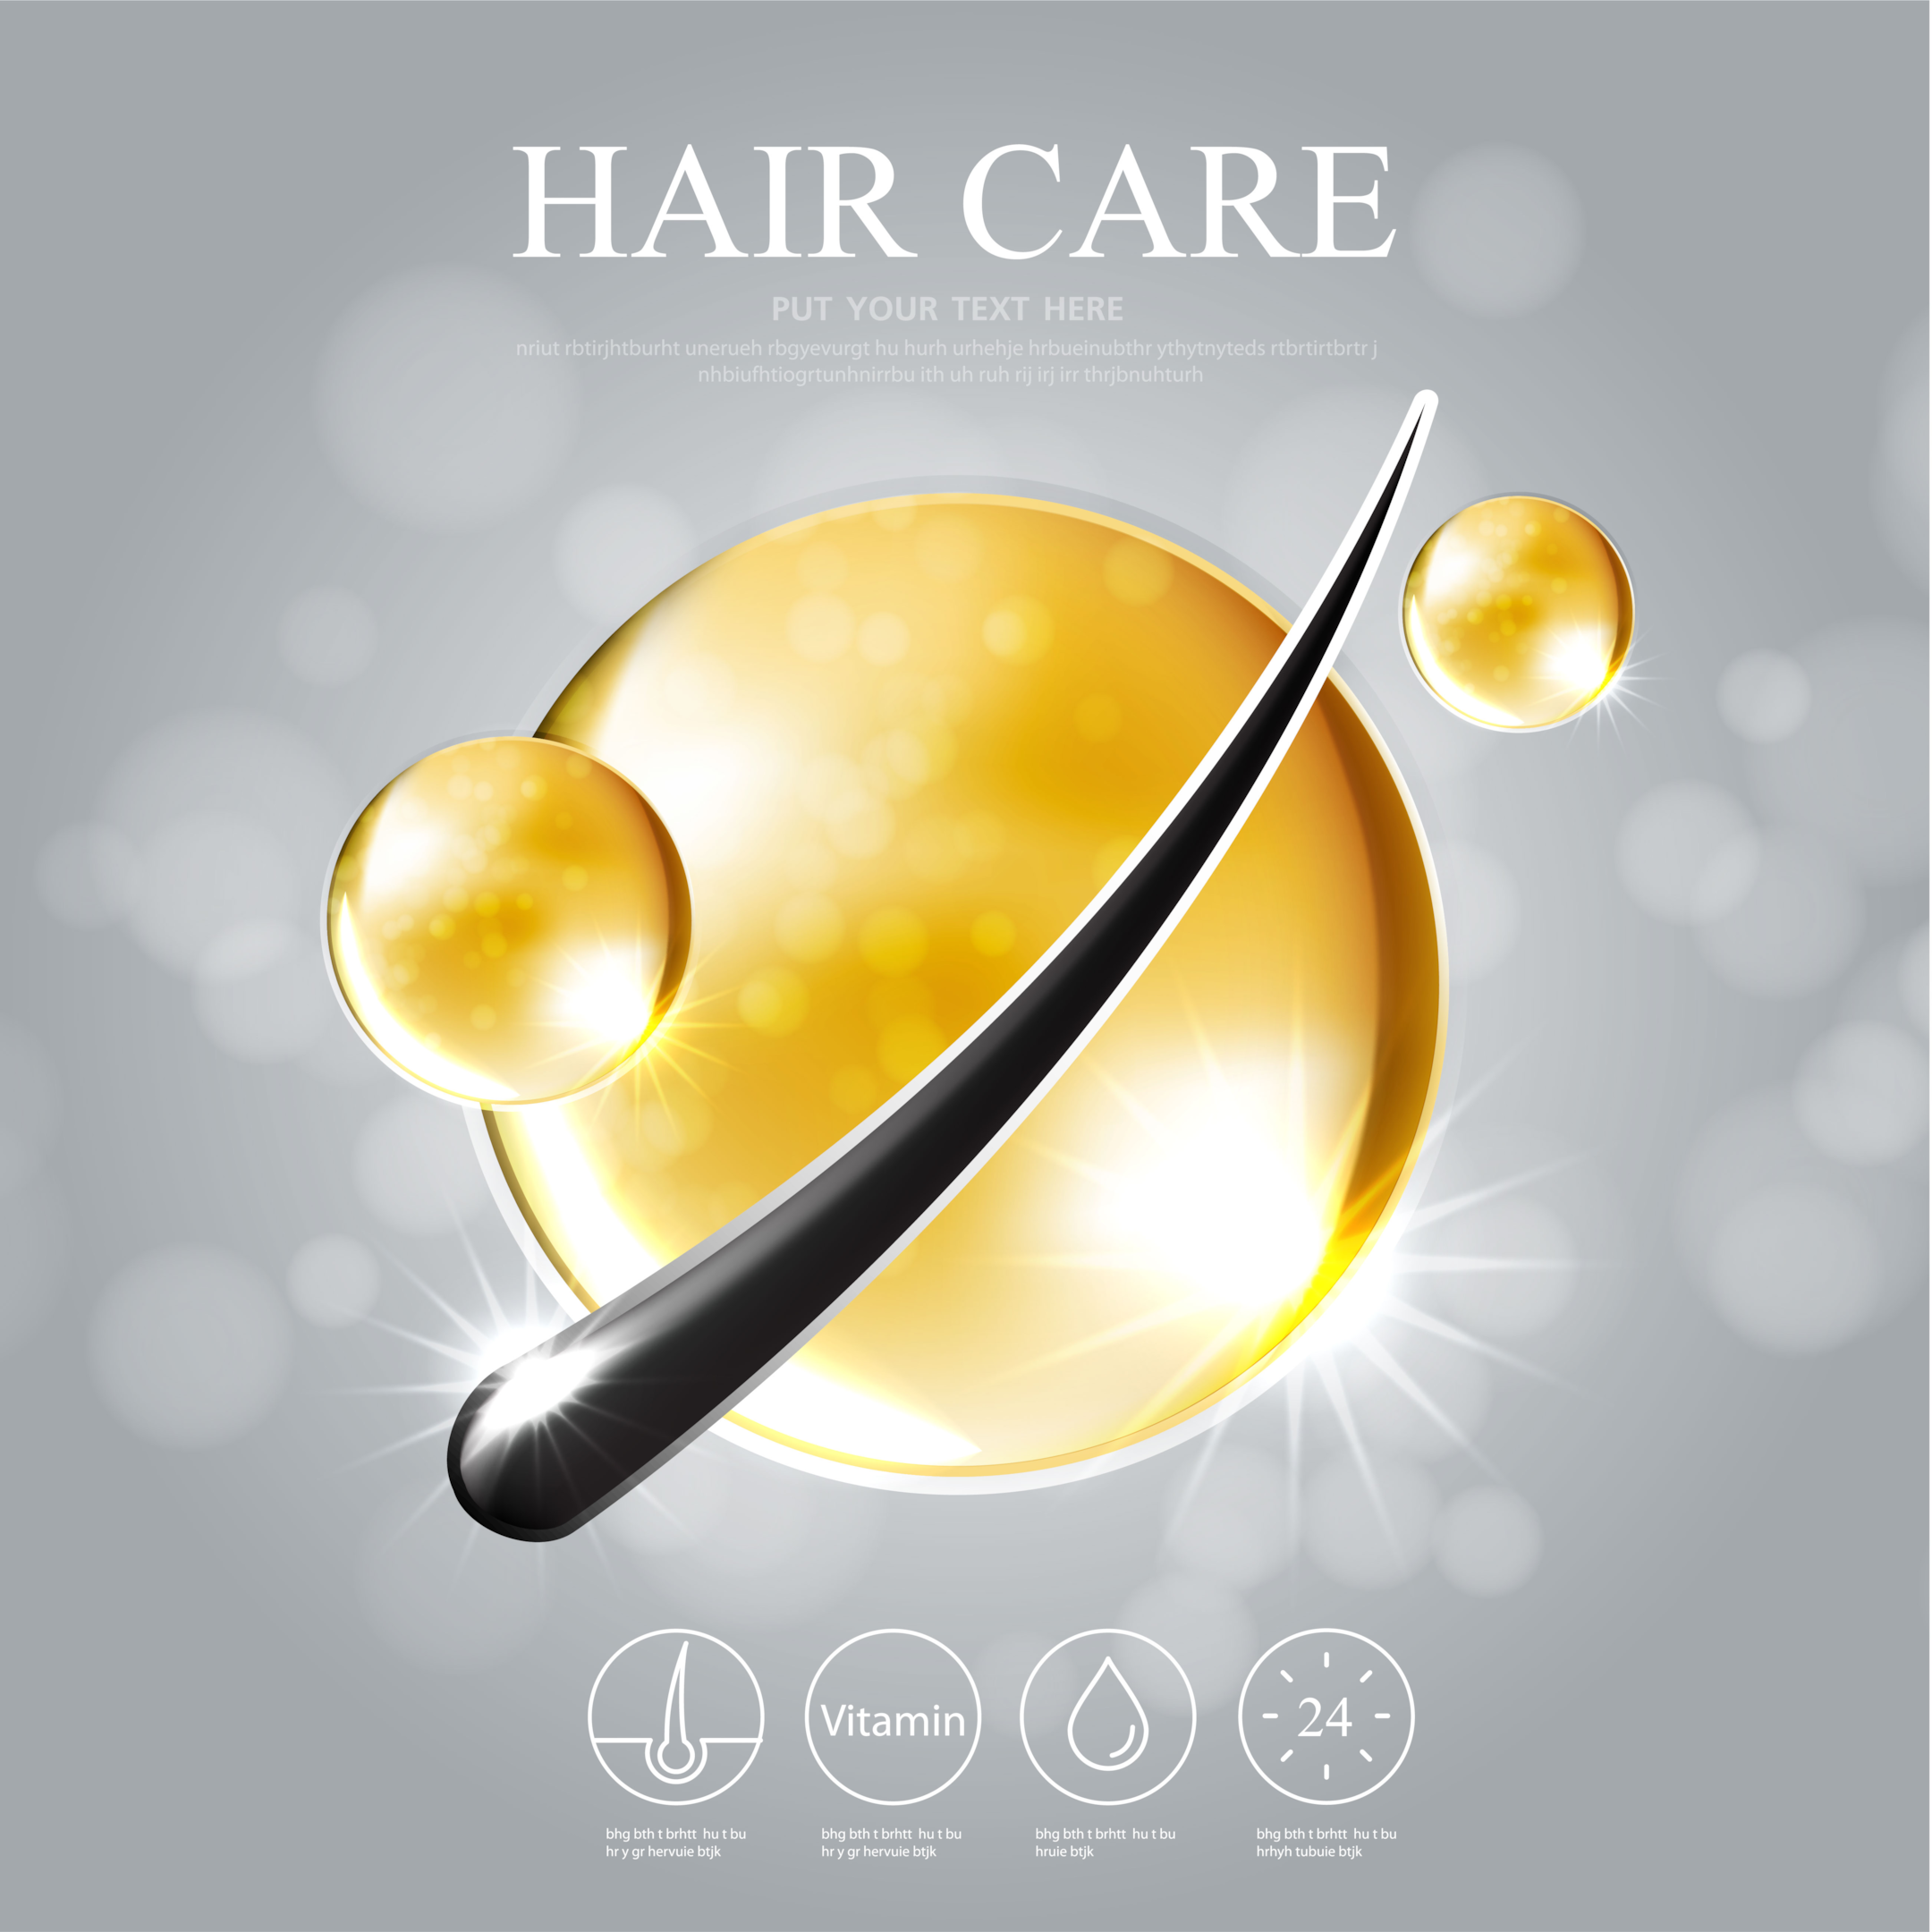 Hair care products can help you with hair loss.